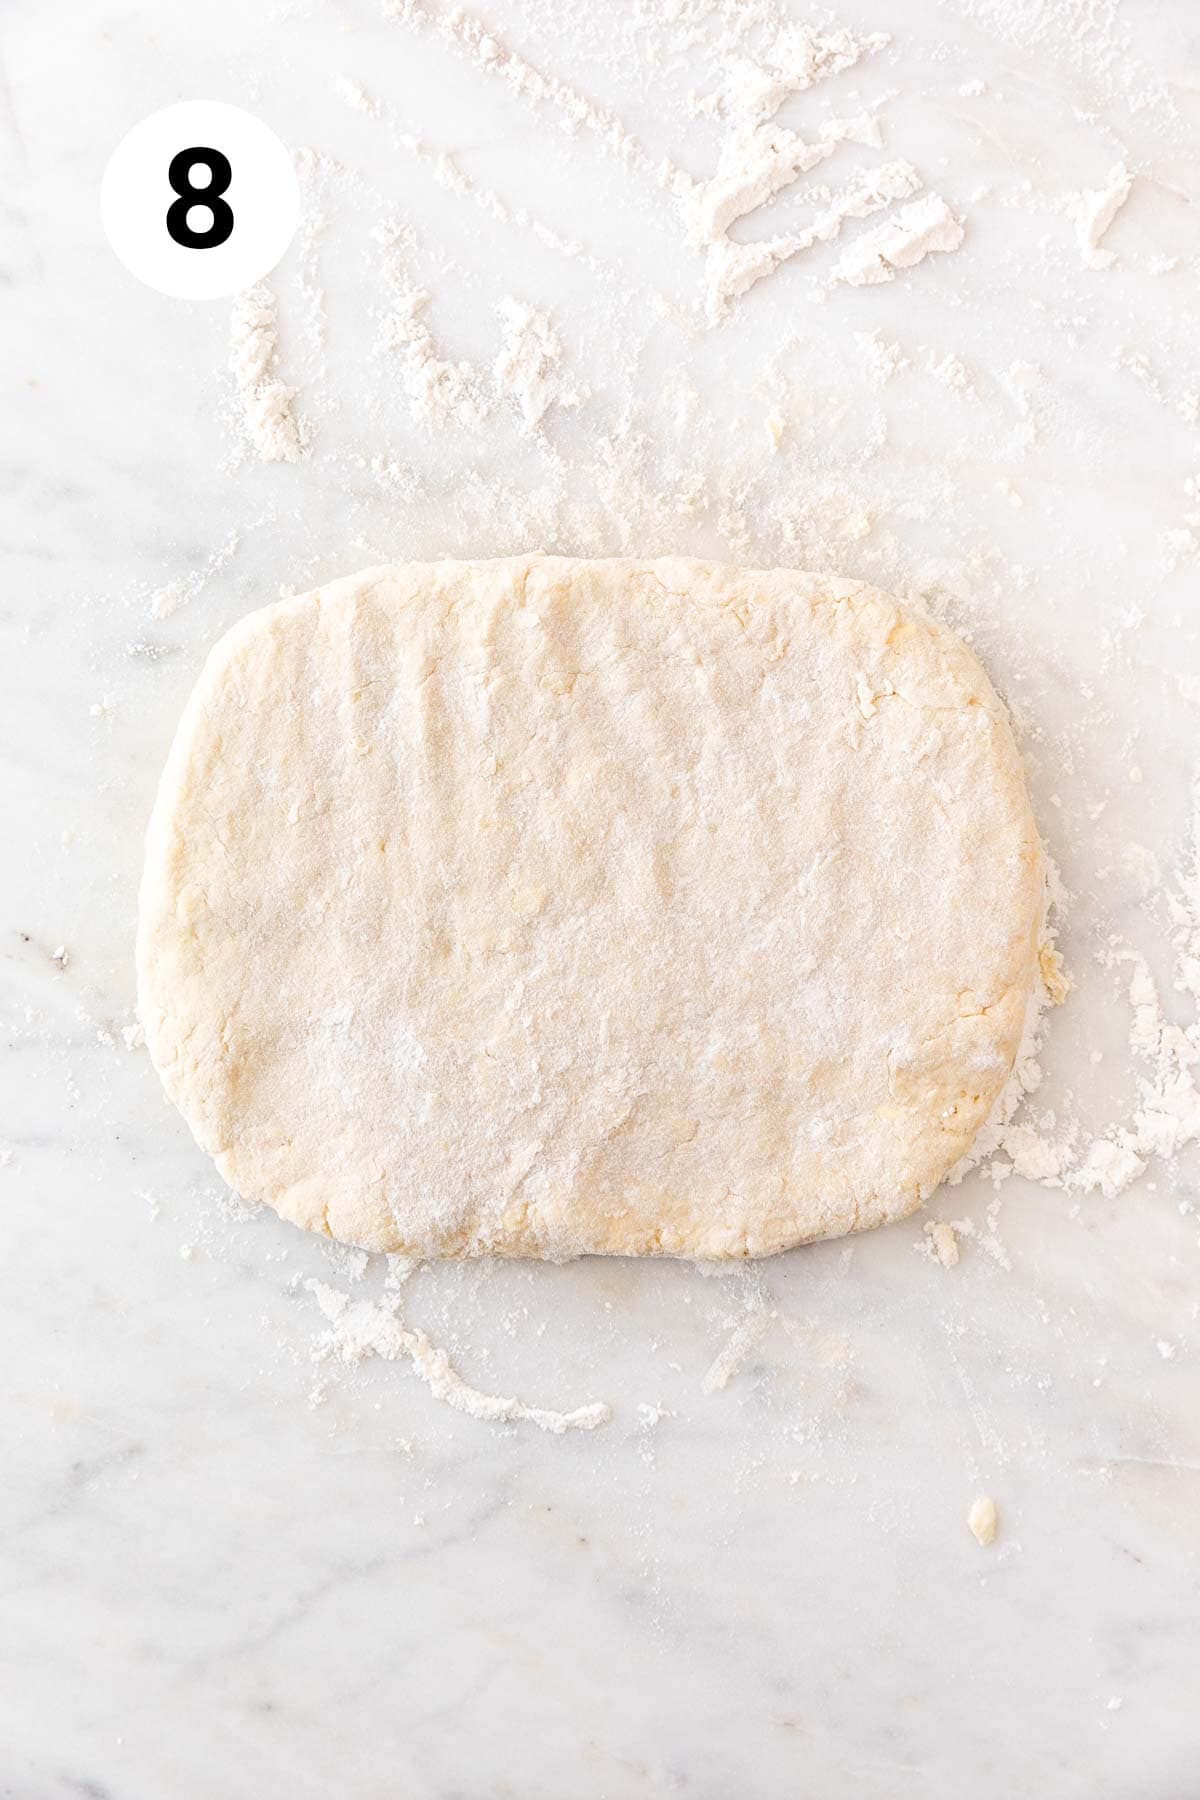 A rectangle of dough on a floured marble surface.